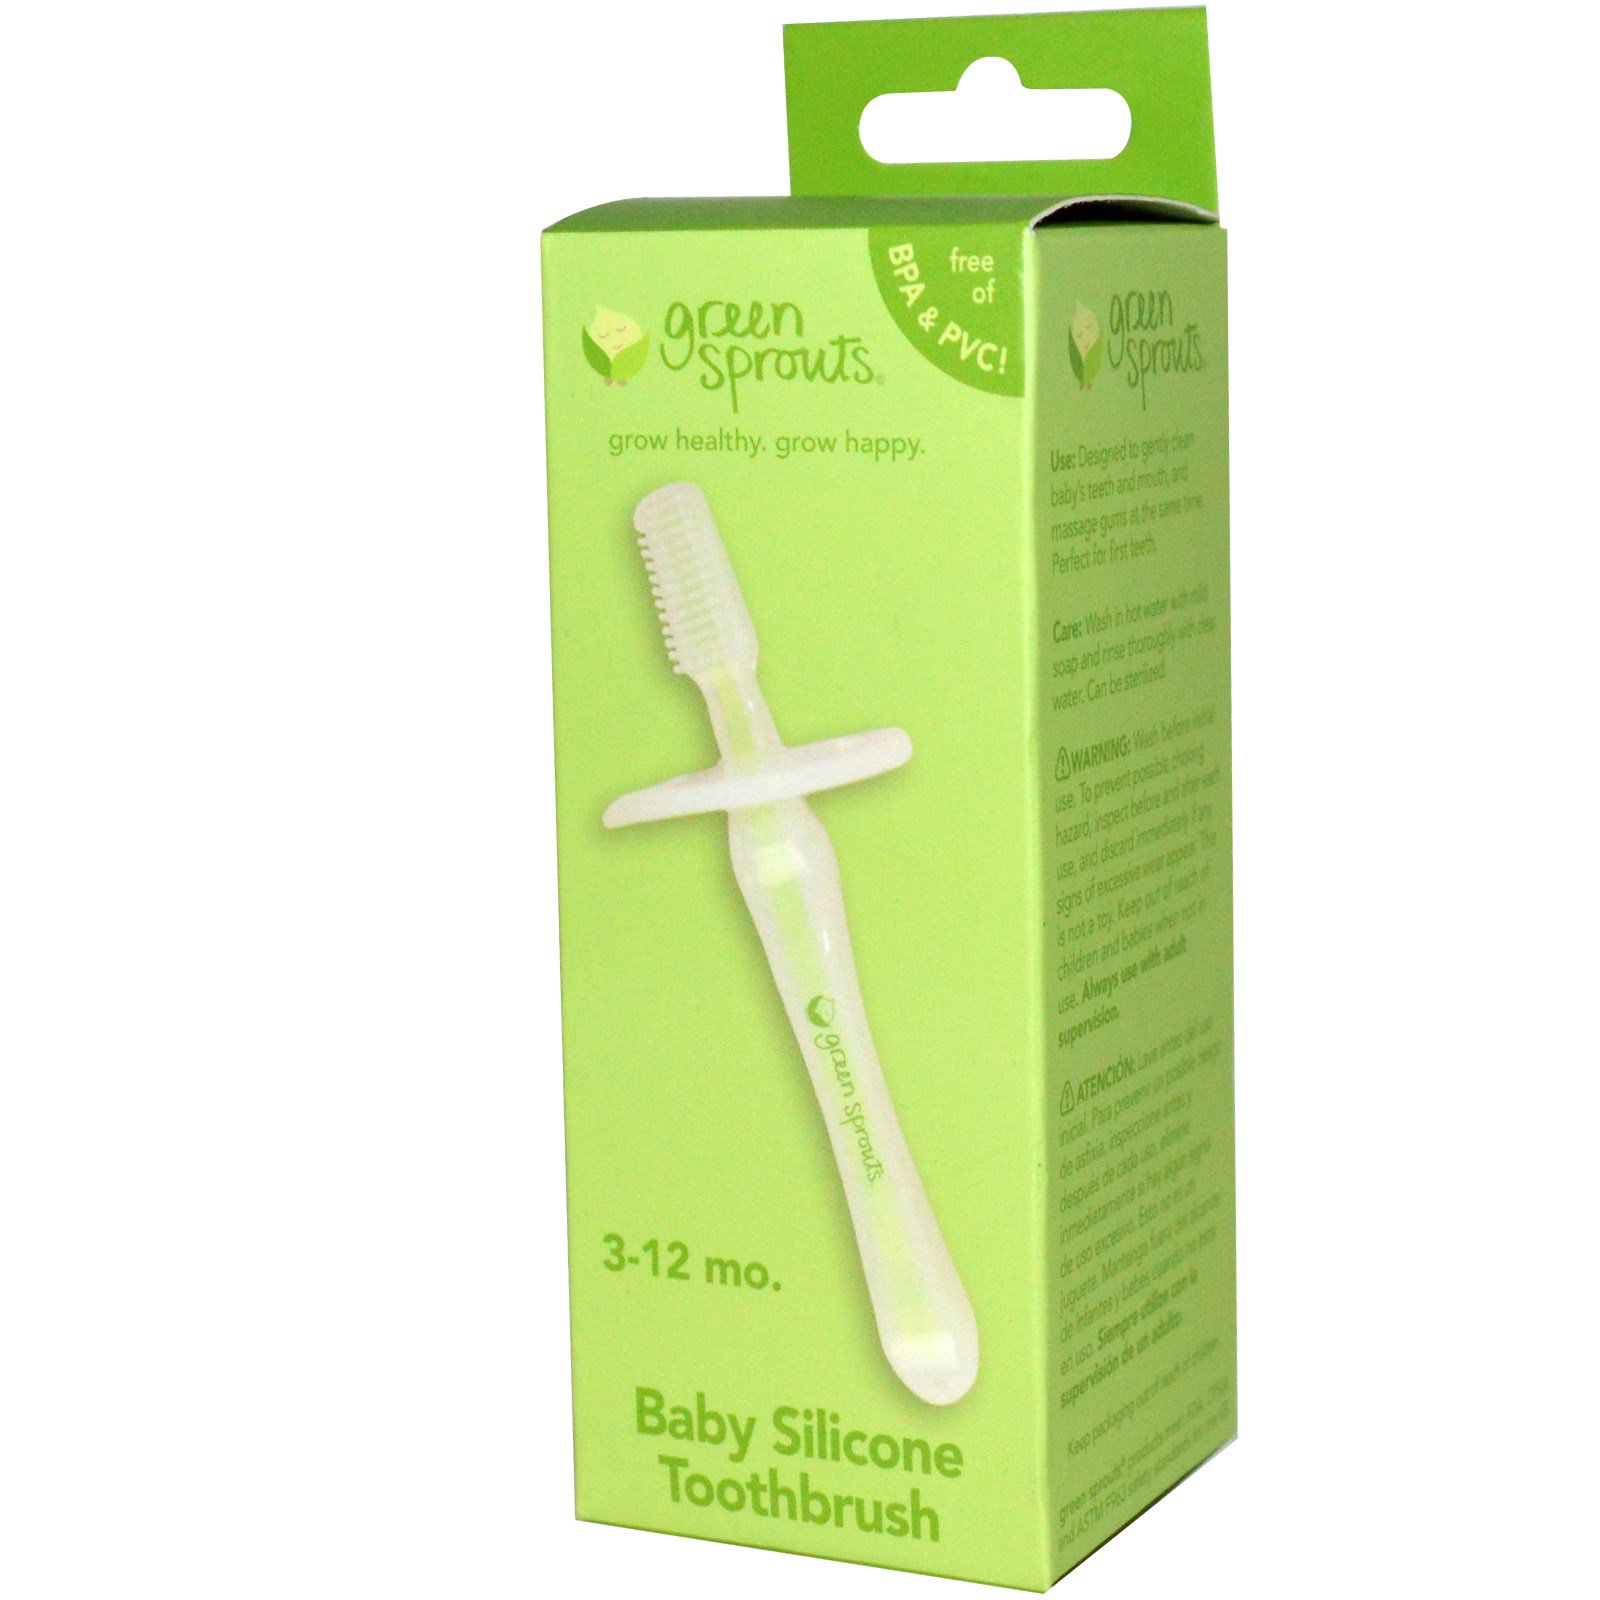 green sprouts silicone baby toothbrush